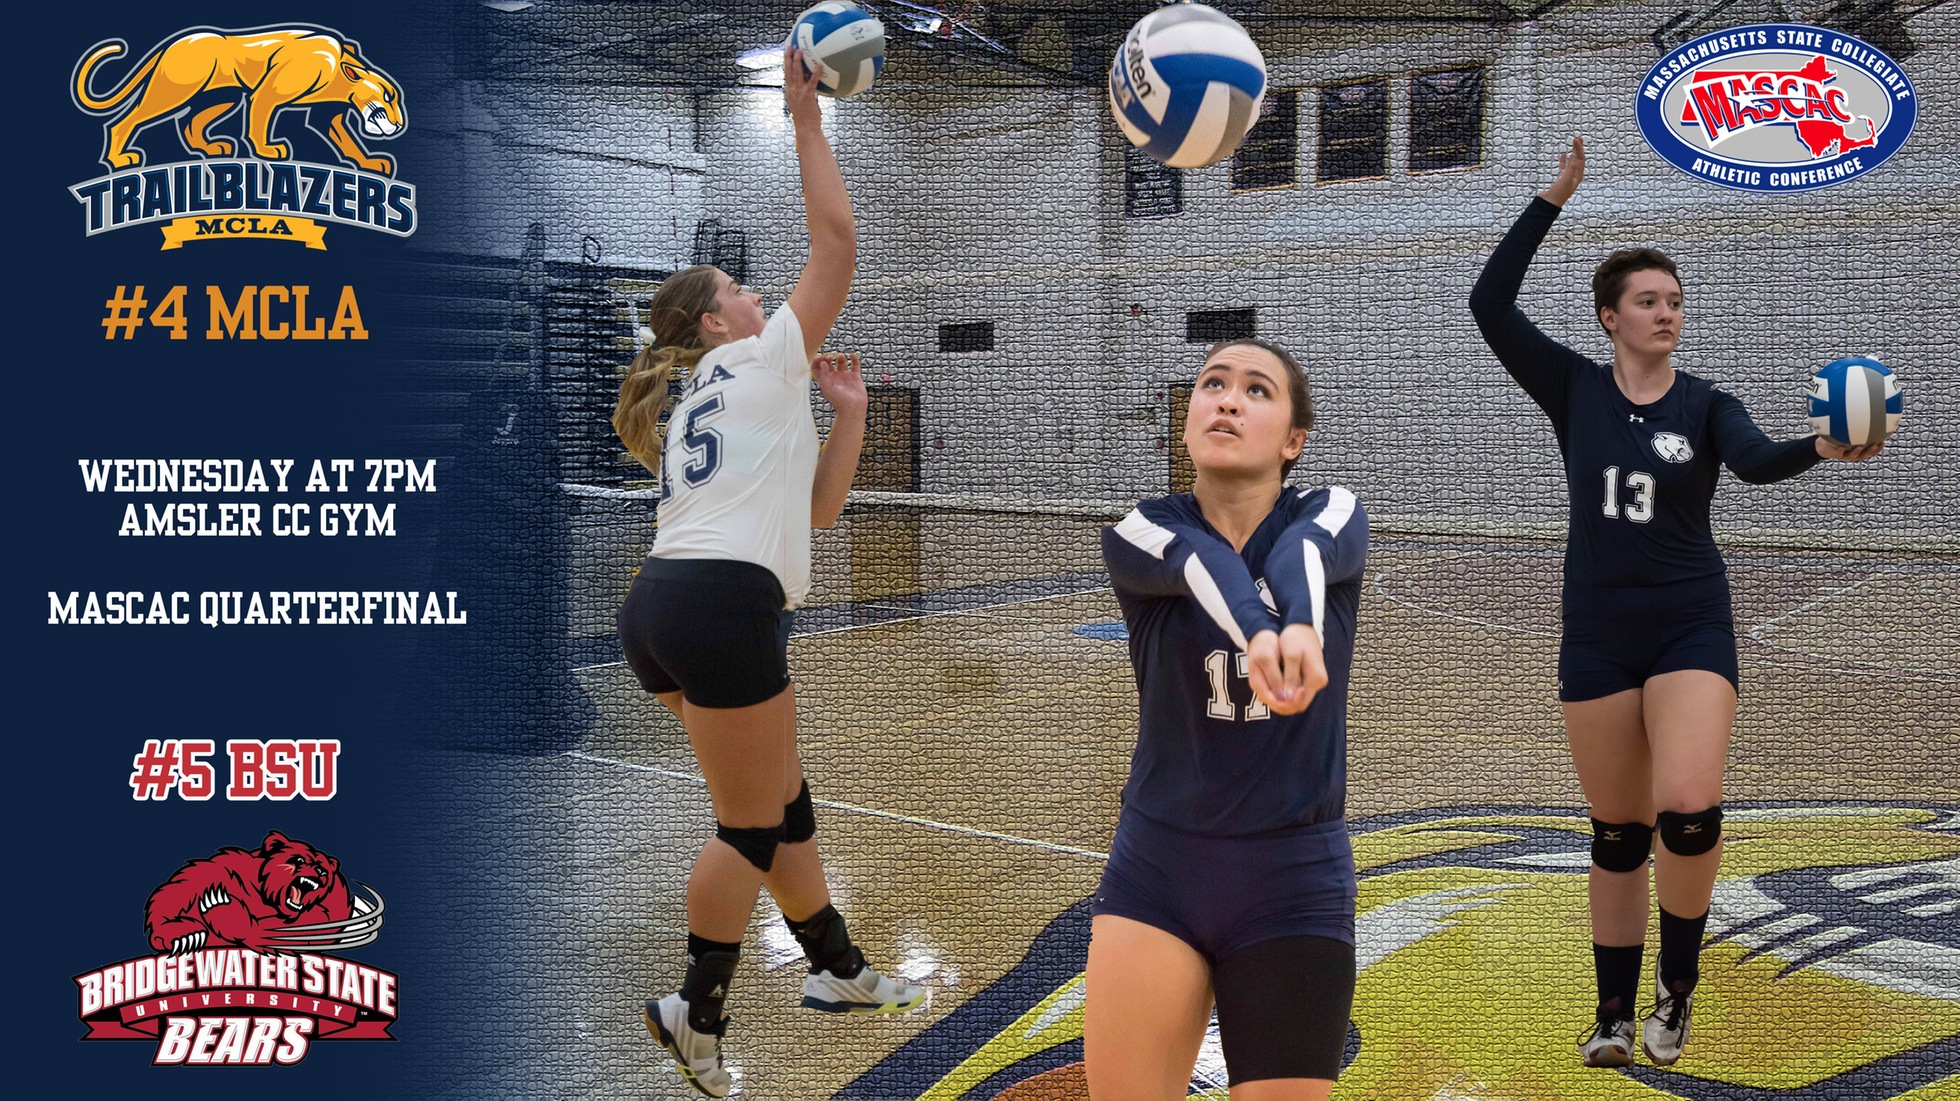 Volleyball earns fourth seed, will host Bridgewater State Wednesday at 7pm in MASCAC Quarterfinals